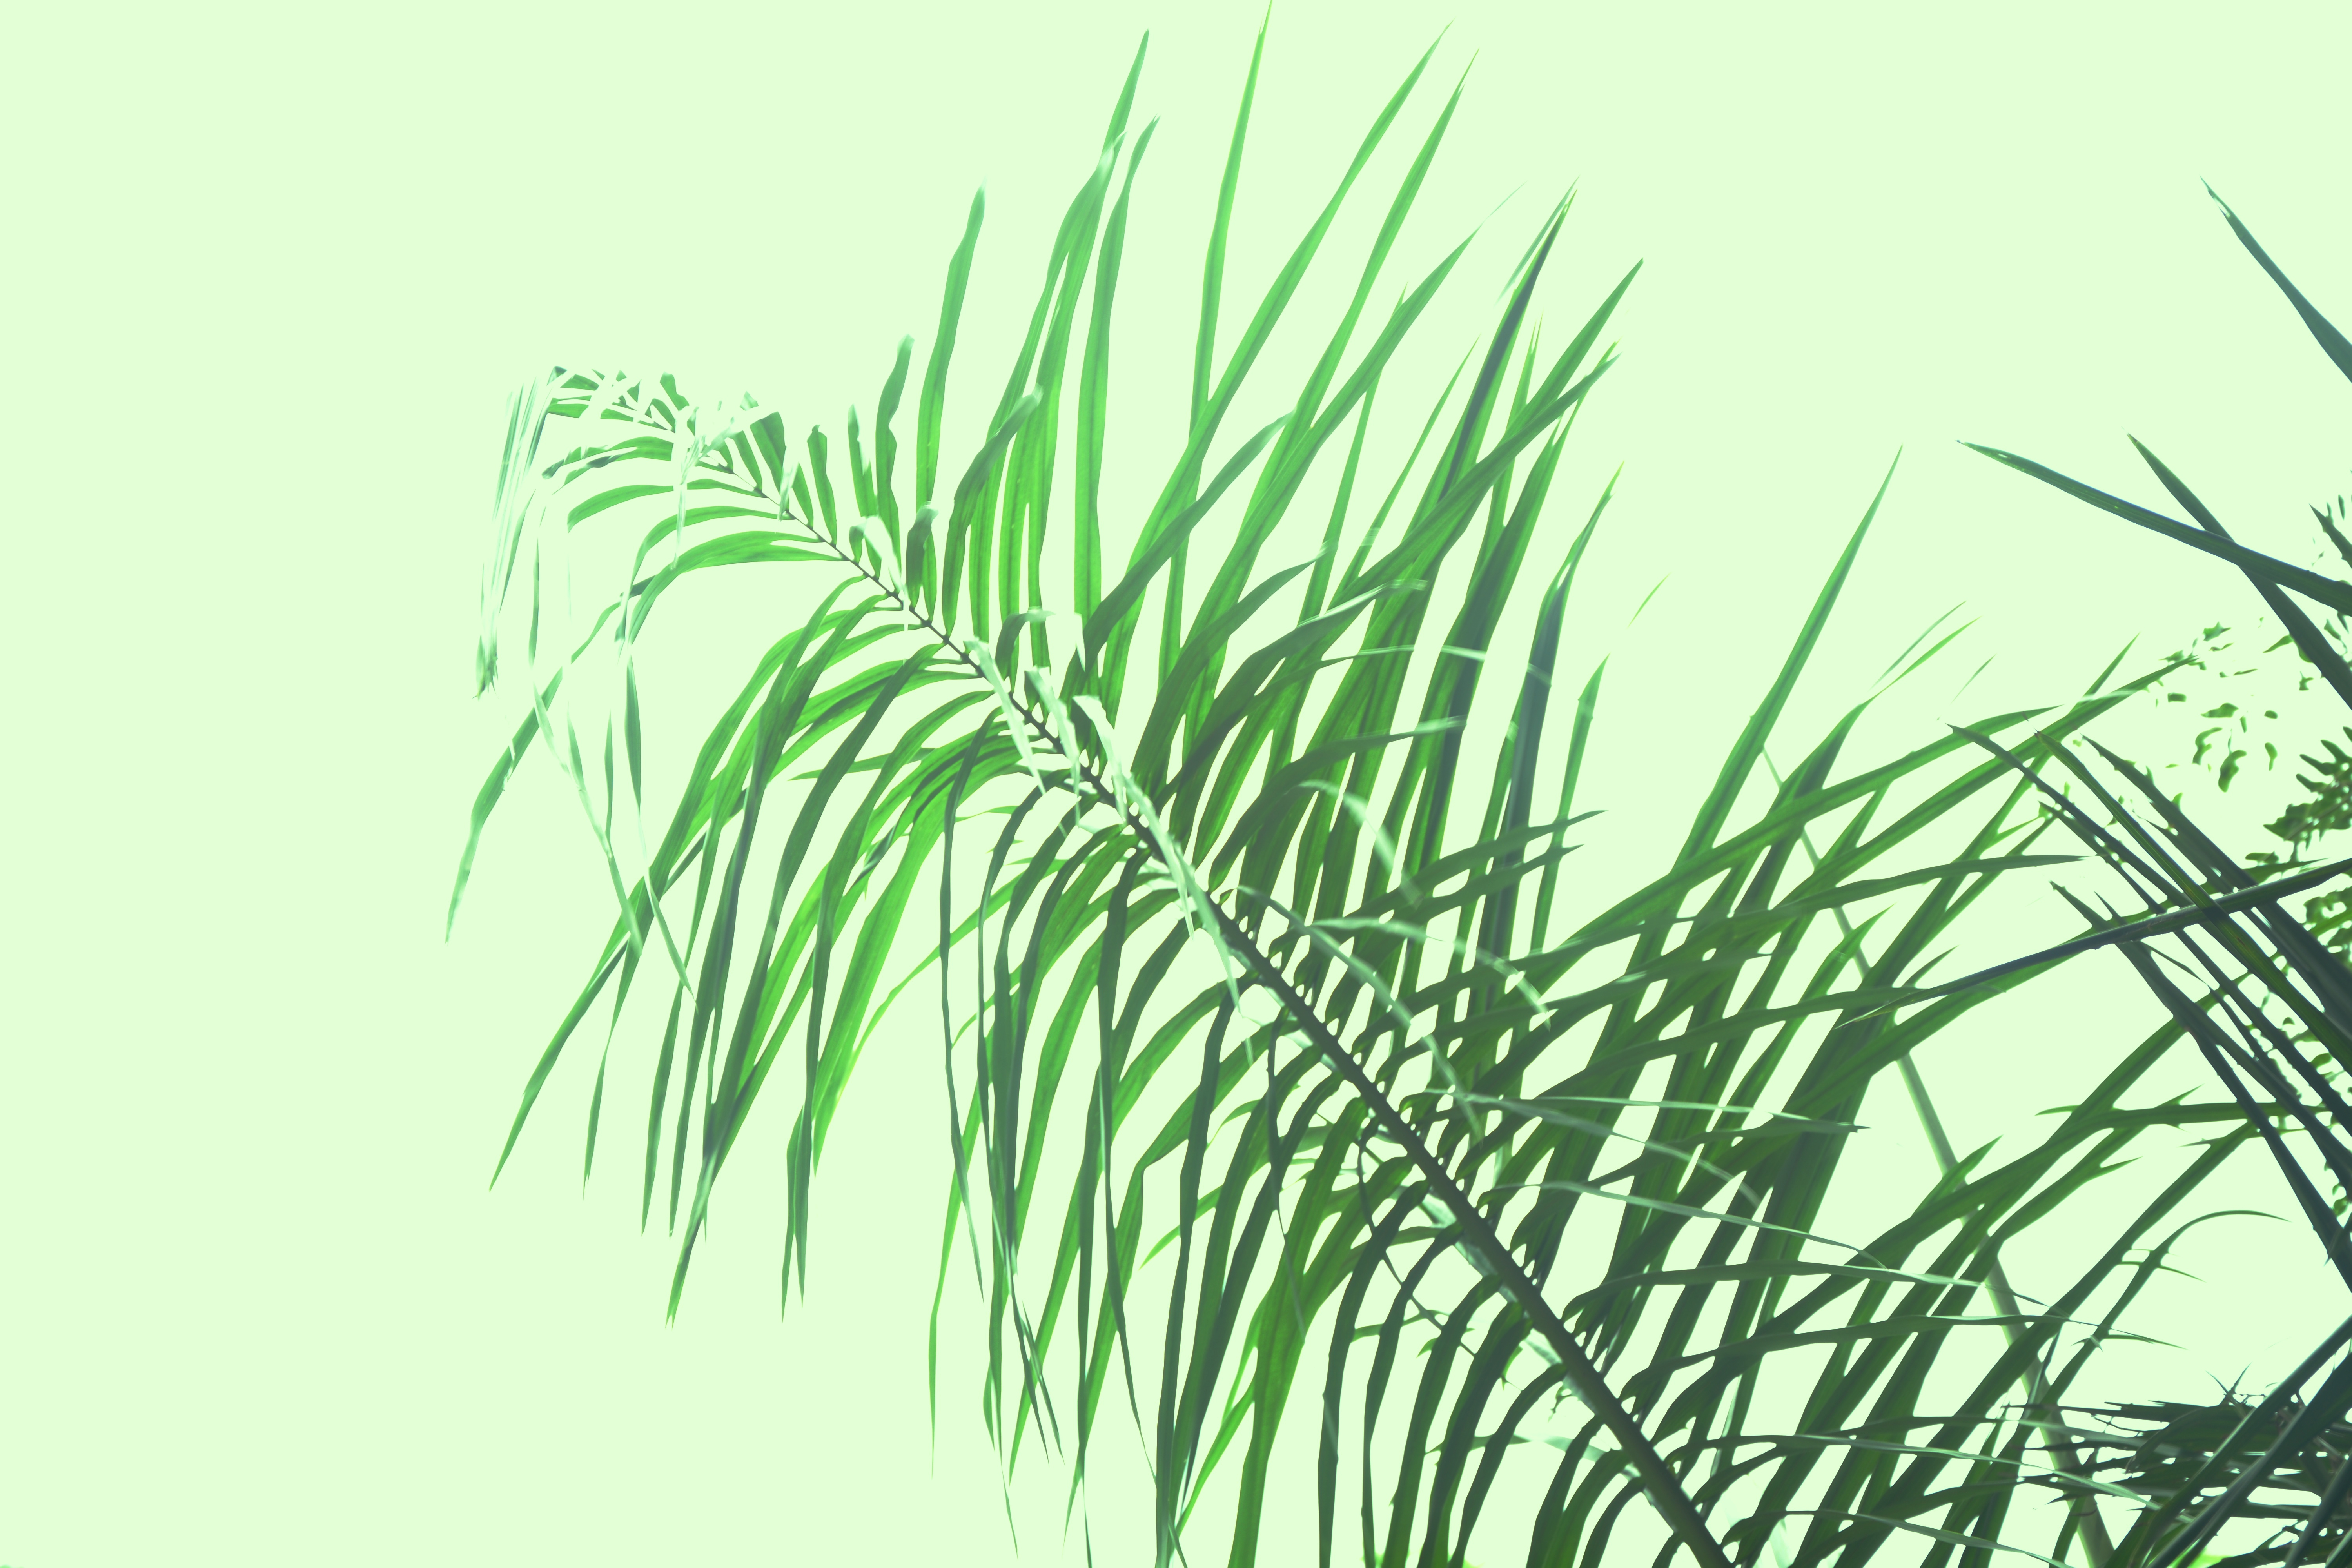 A NEW PALM LEAF SMILING AT WORLD